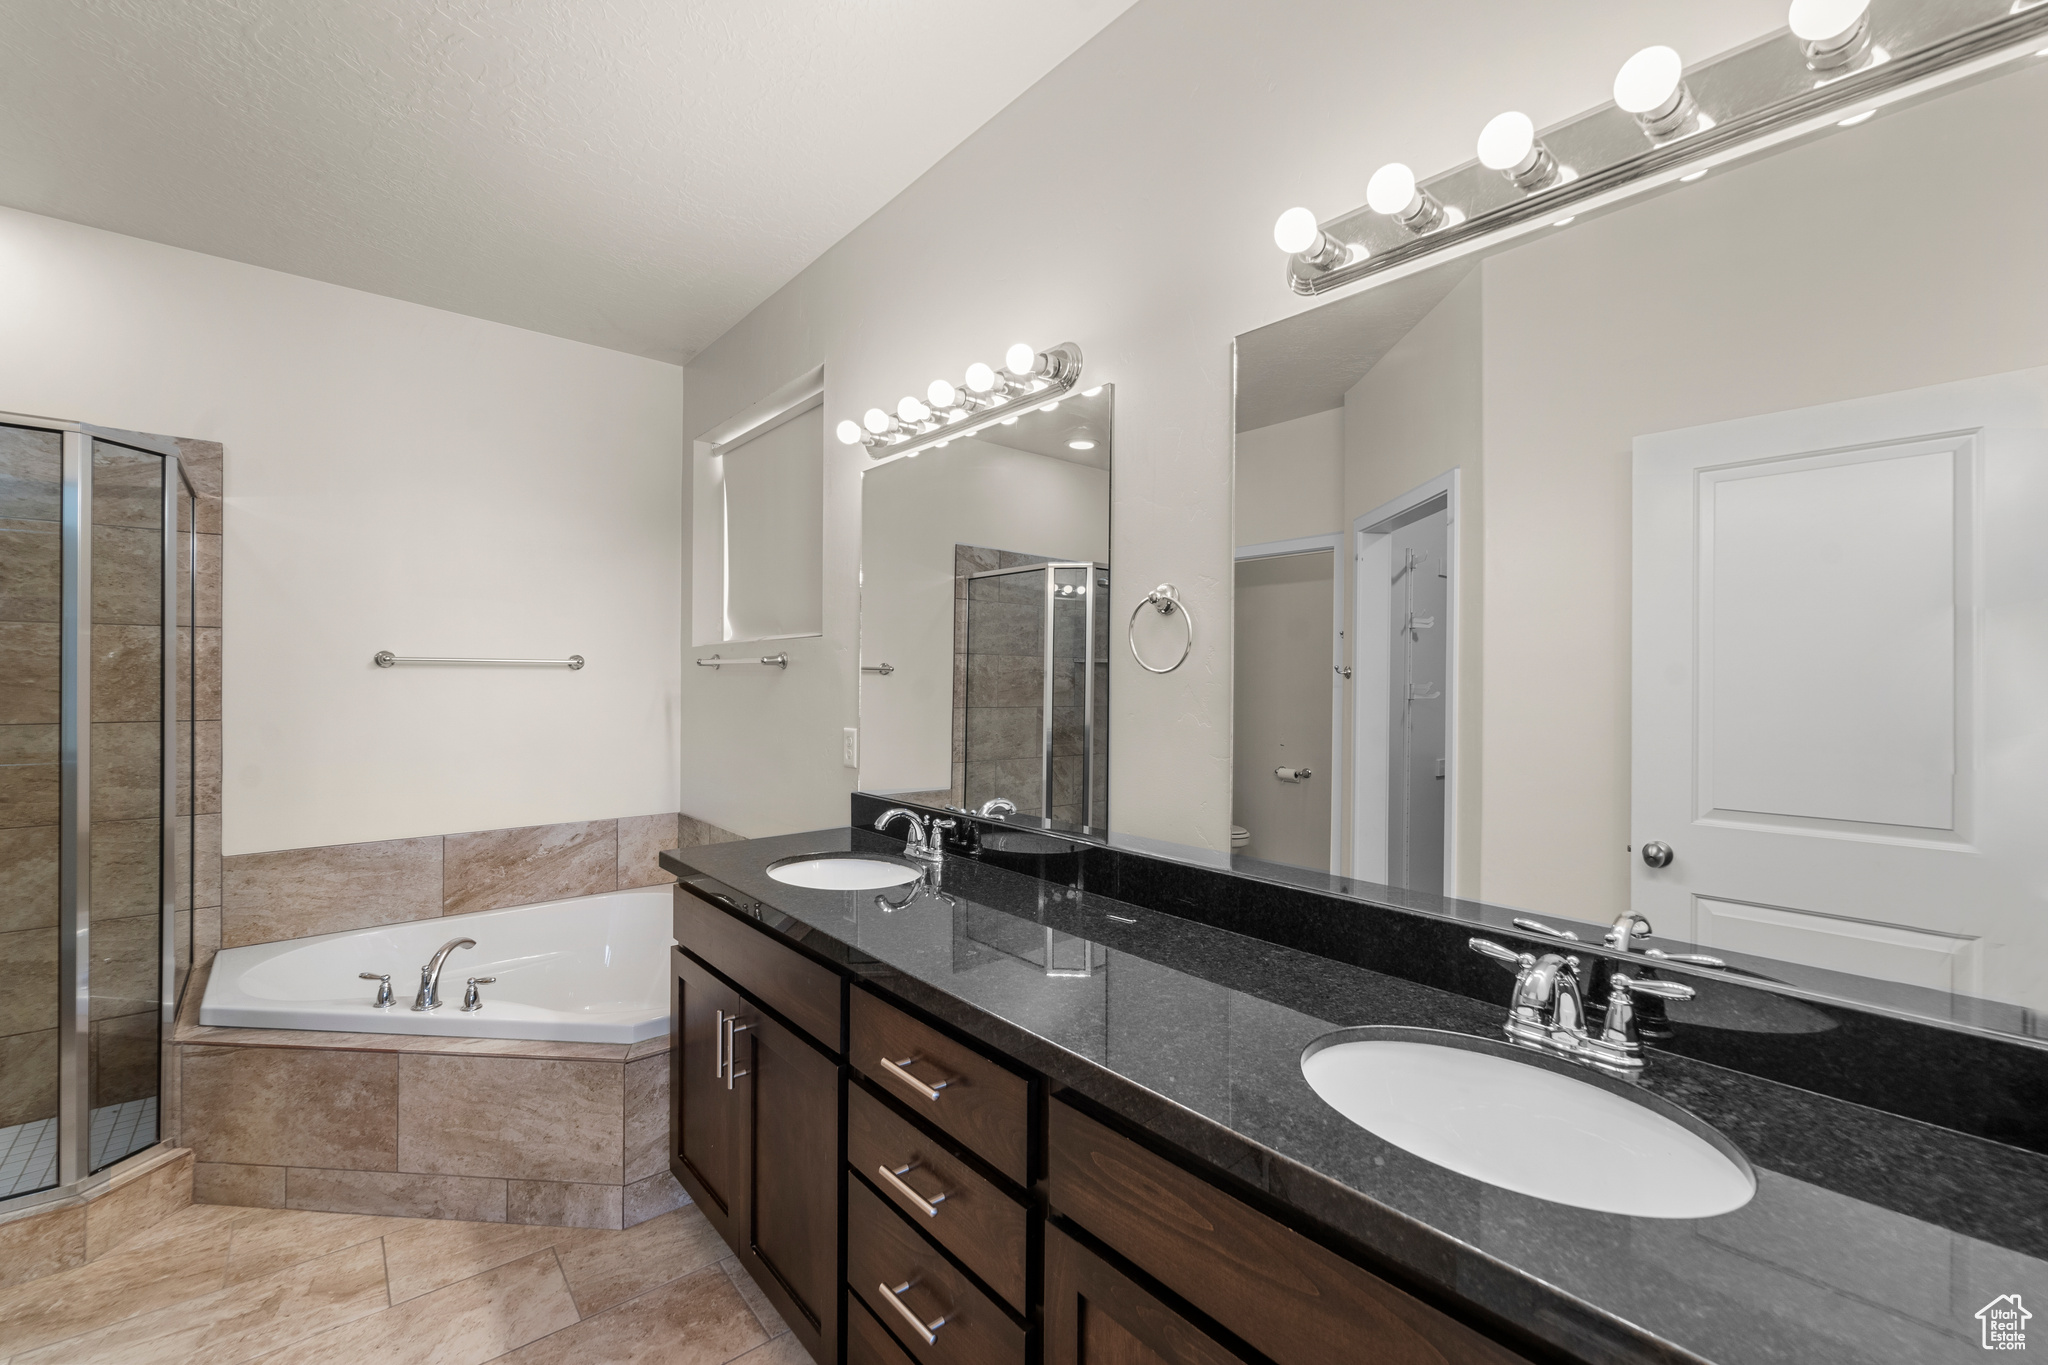 Bathroom featuring tile flooring, dual sinks, separate shower and tub, and oversized vanity